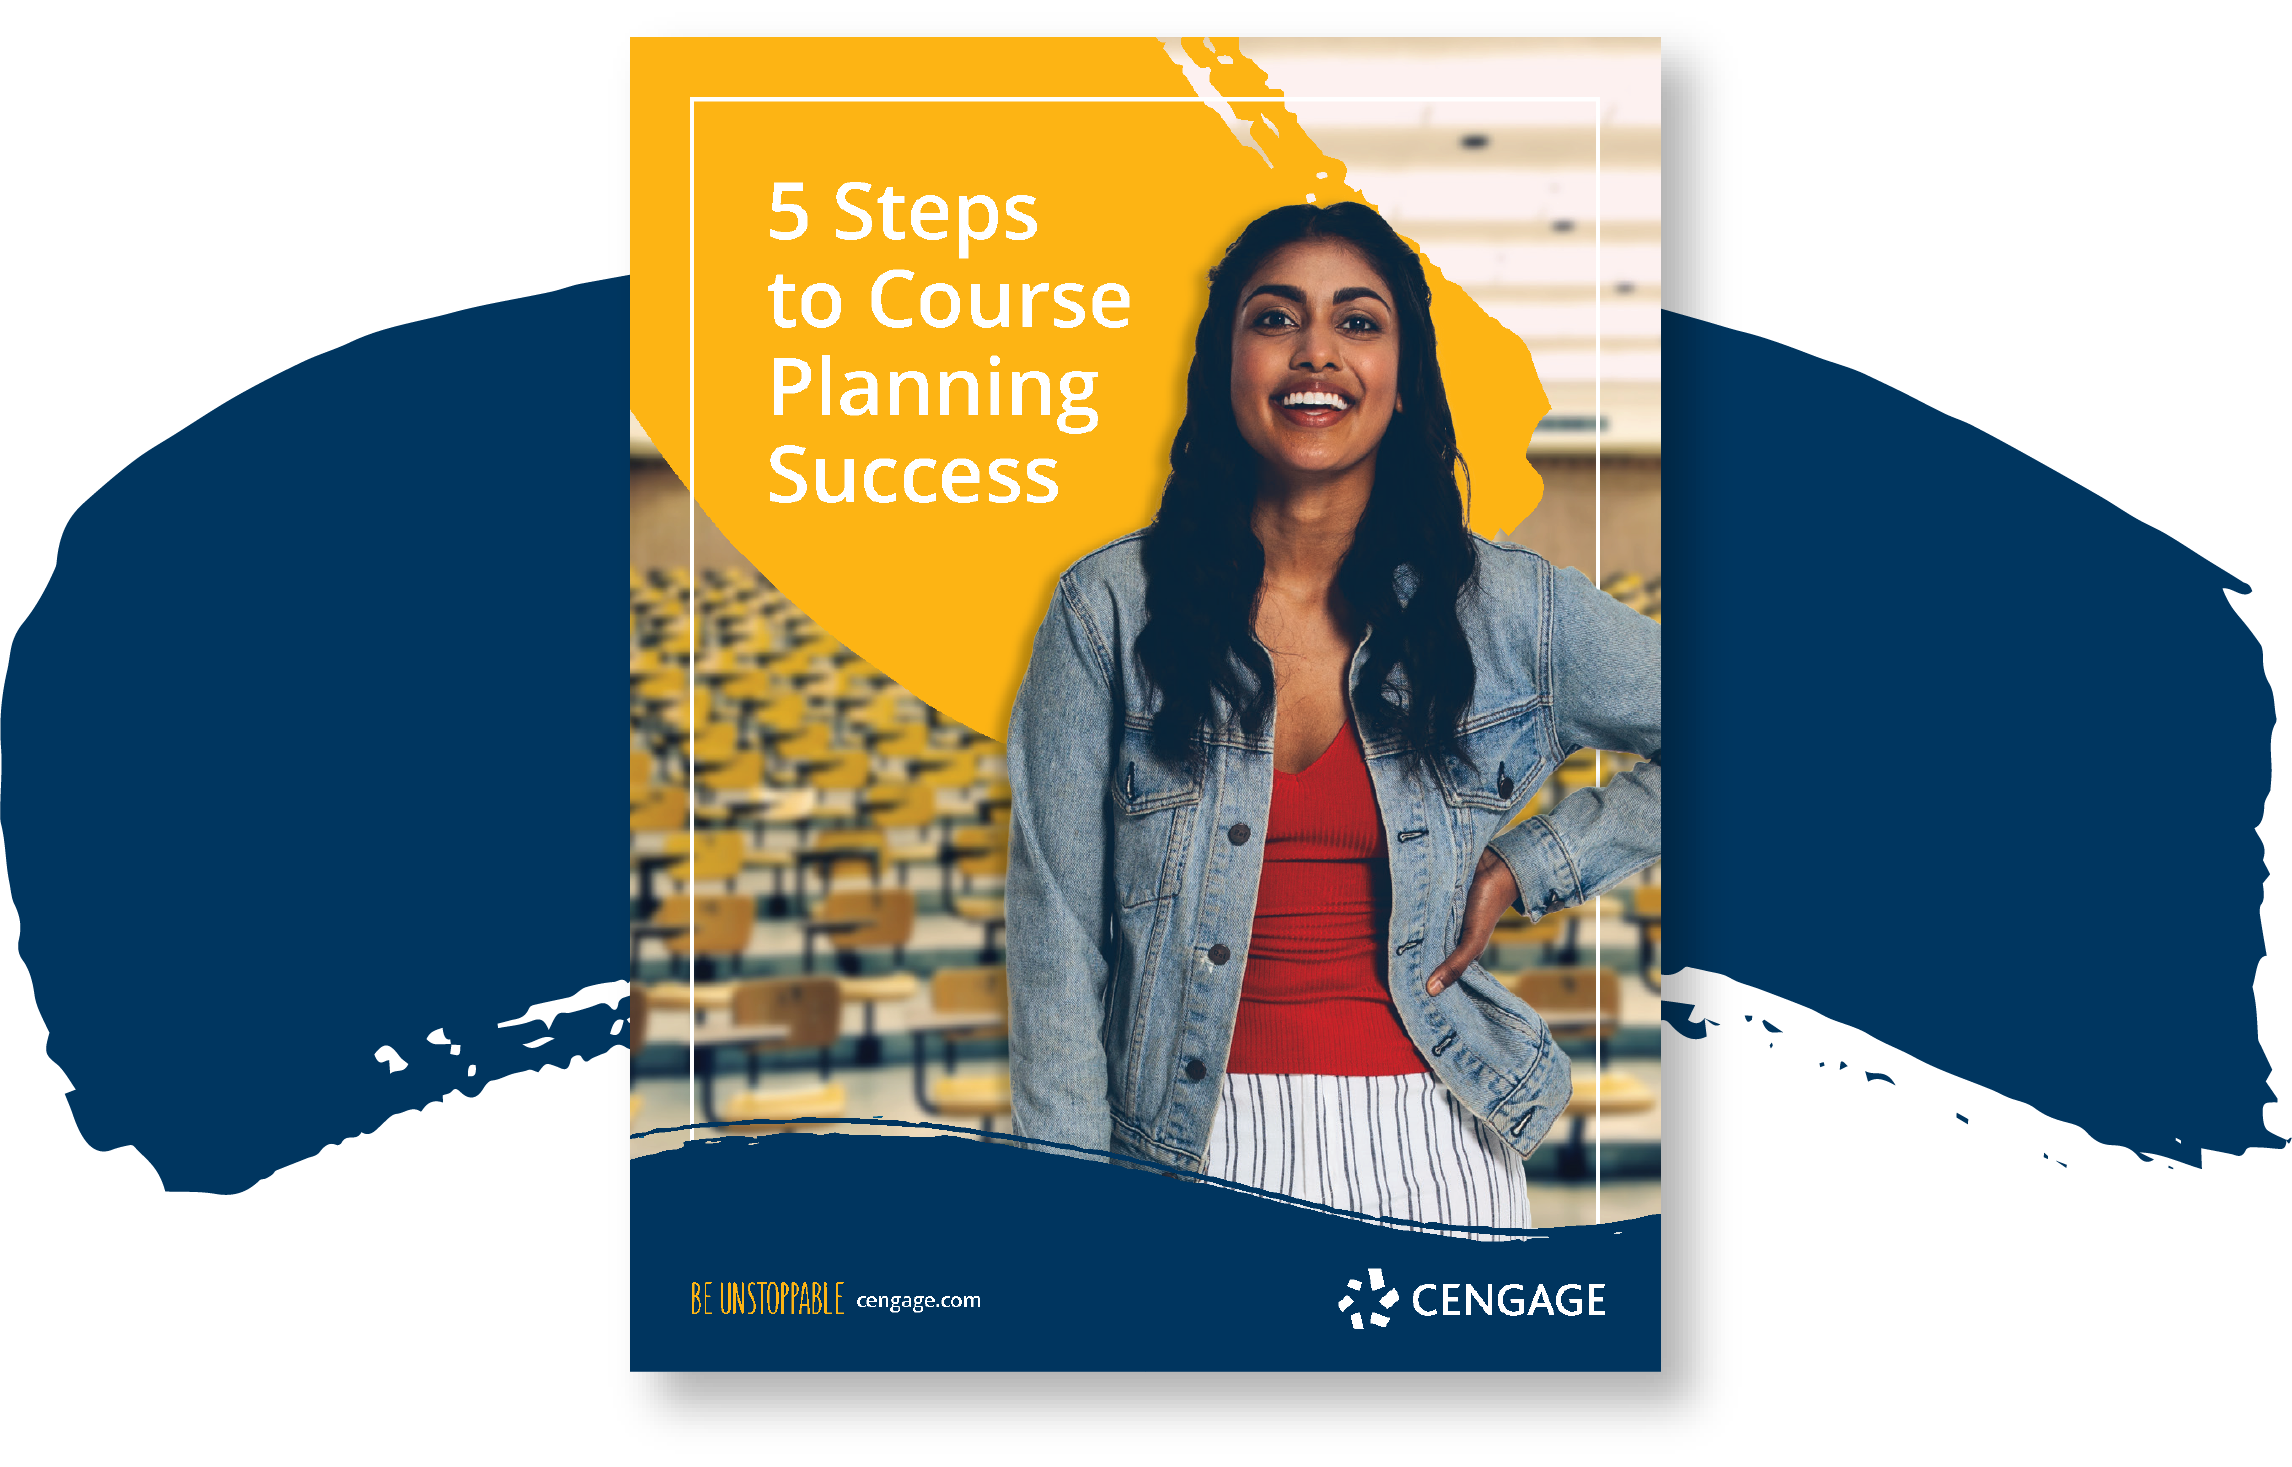 5 Steps to Course Planning Success